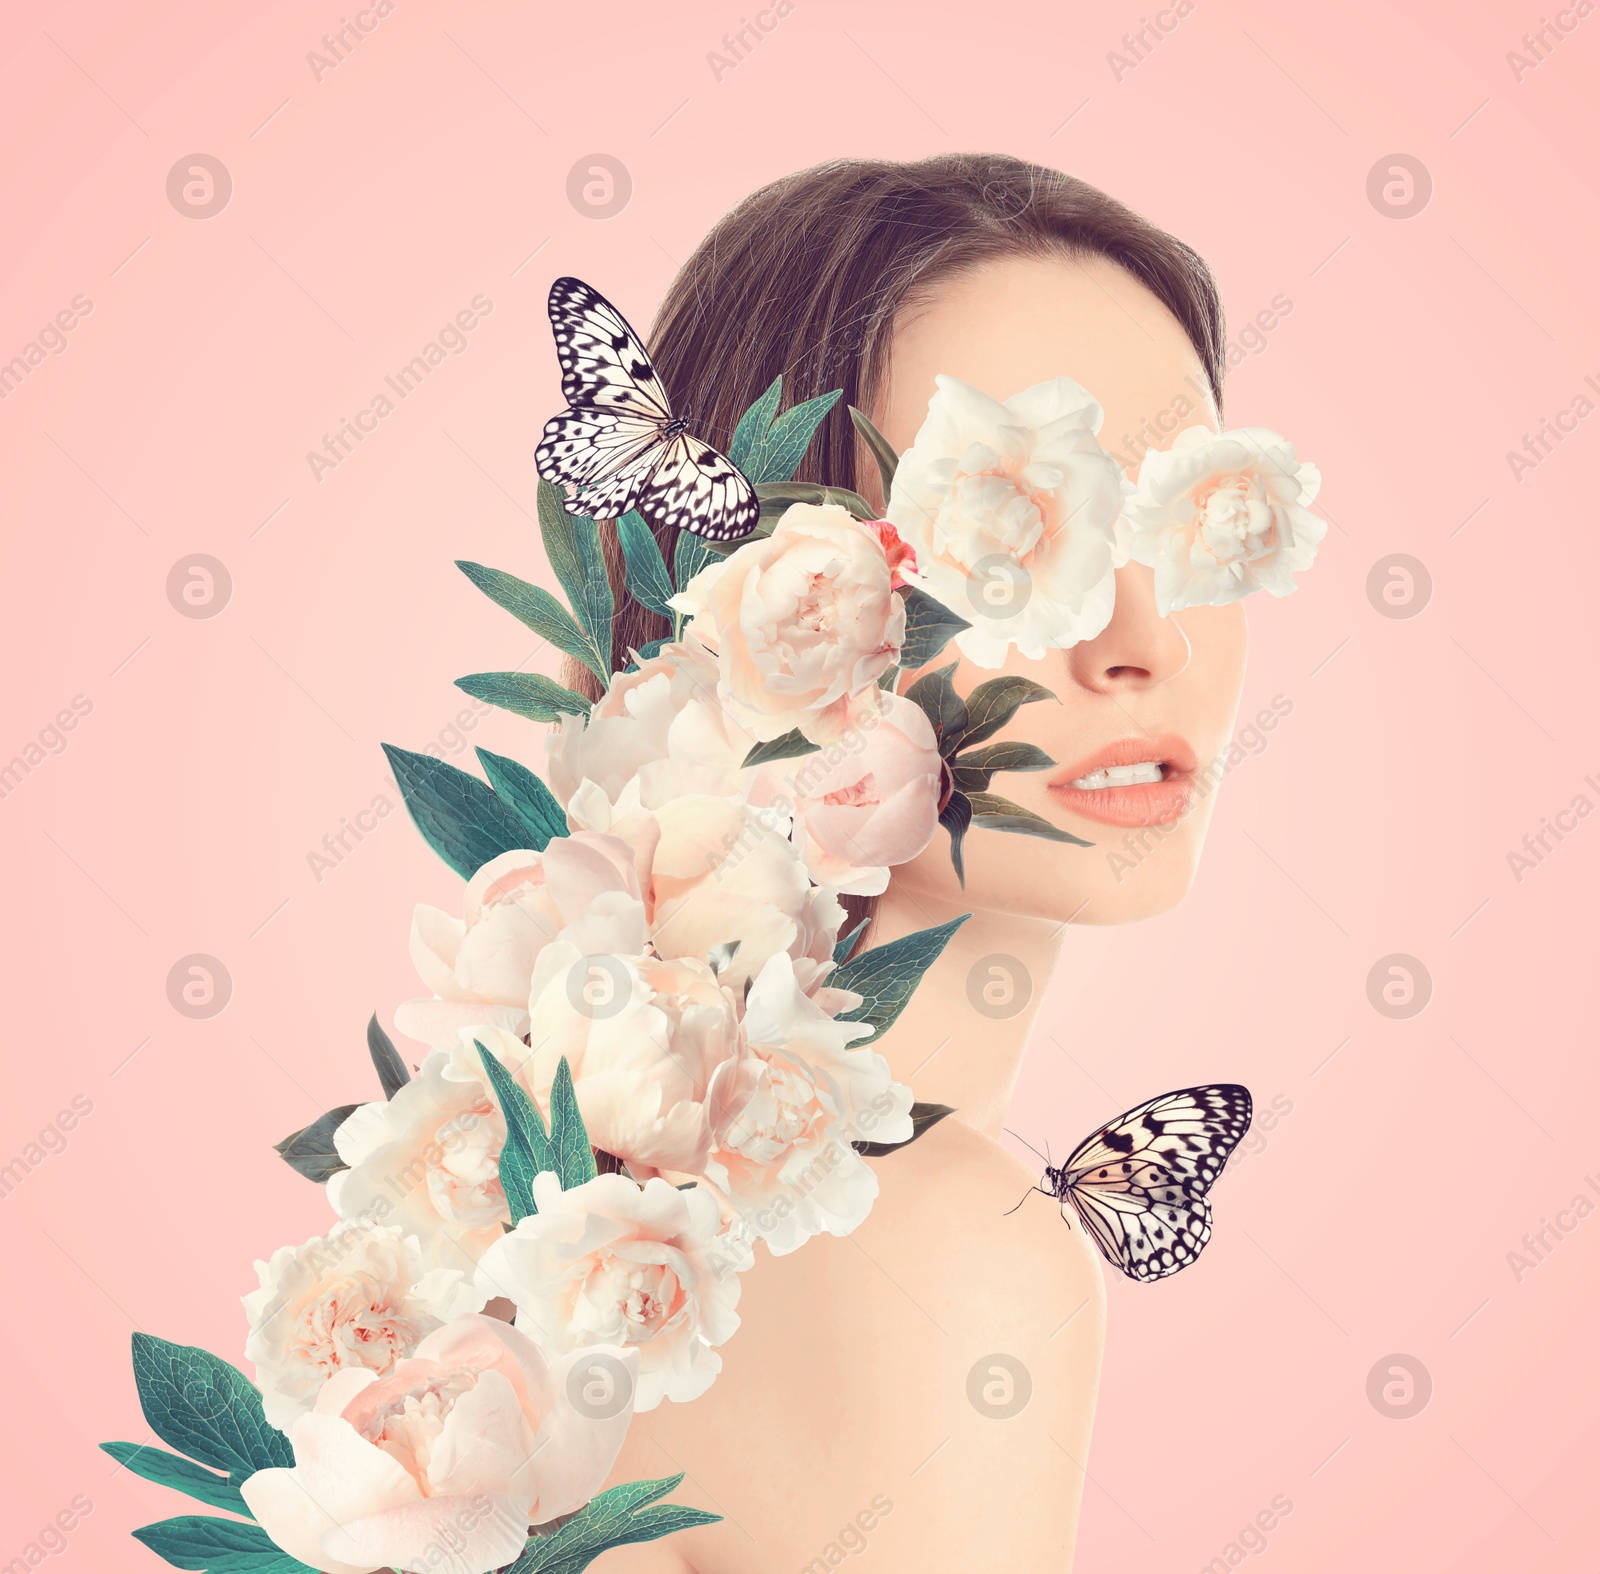 Image of Art collage with woman, butterflies and peony flowers on beige background